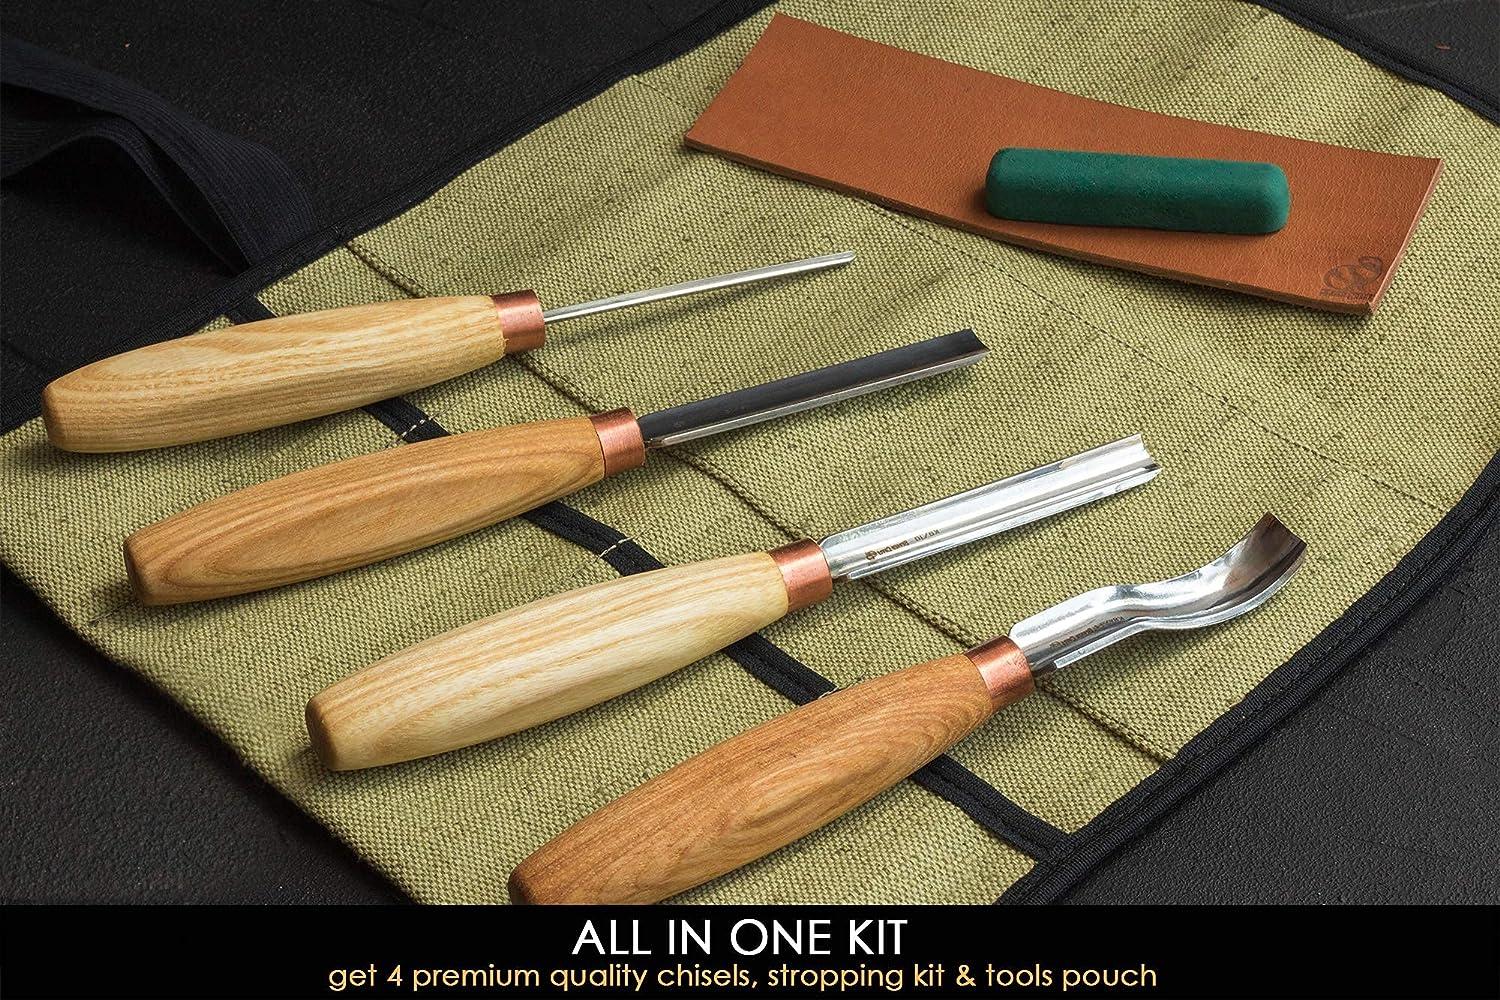 Gouge Wood Carving Tools Kit in Rolling Pouch With Leather 